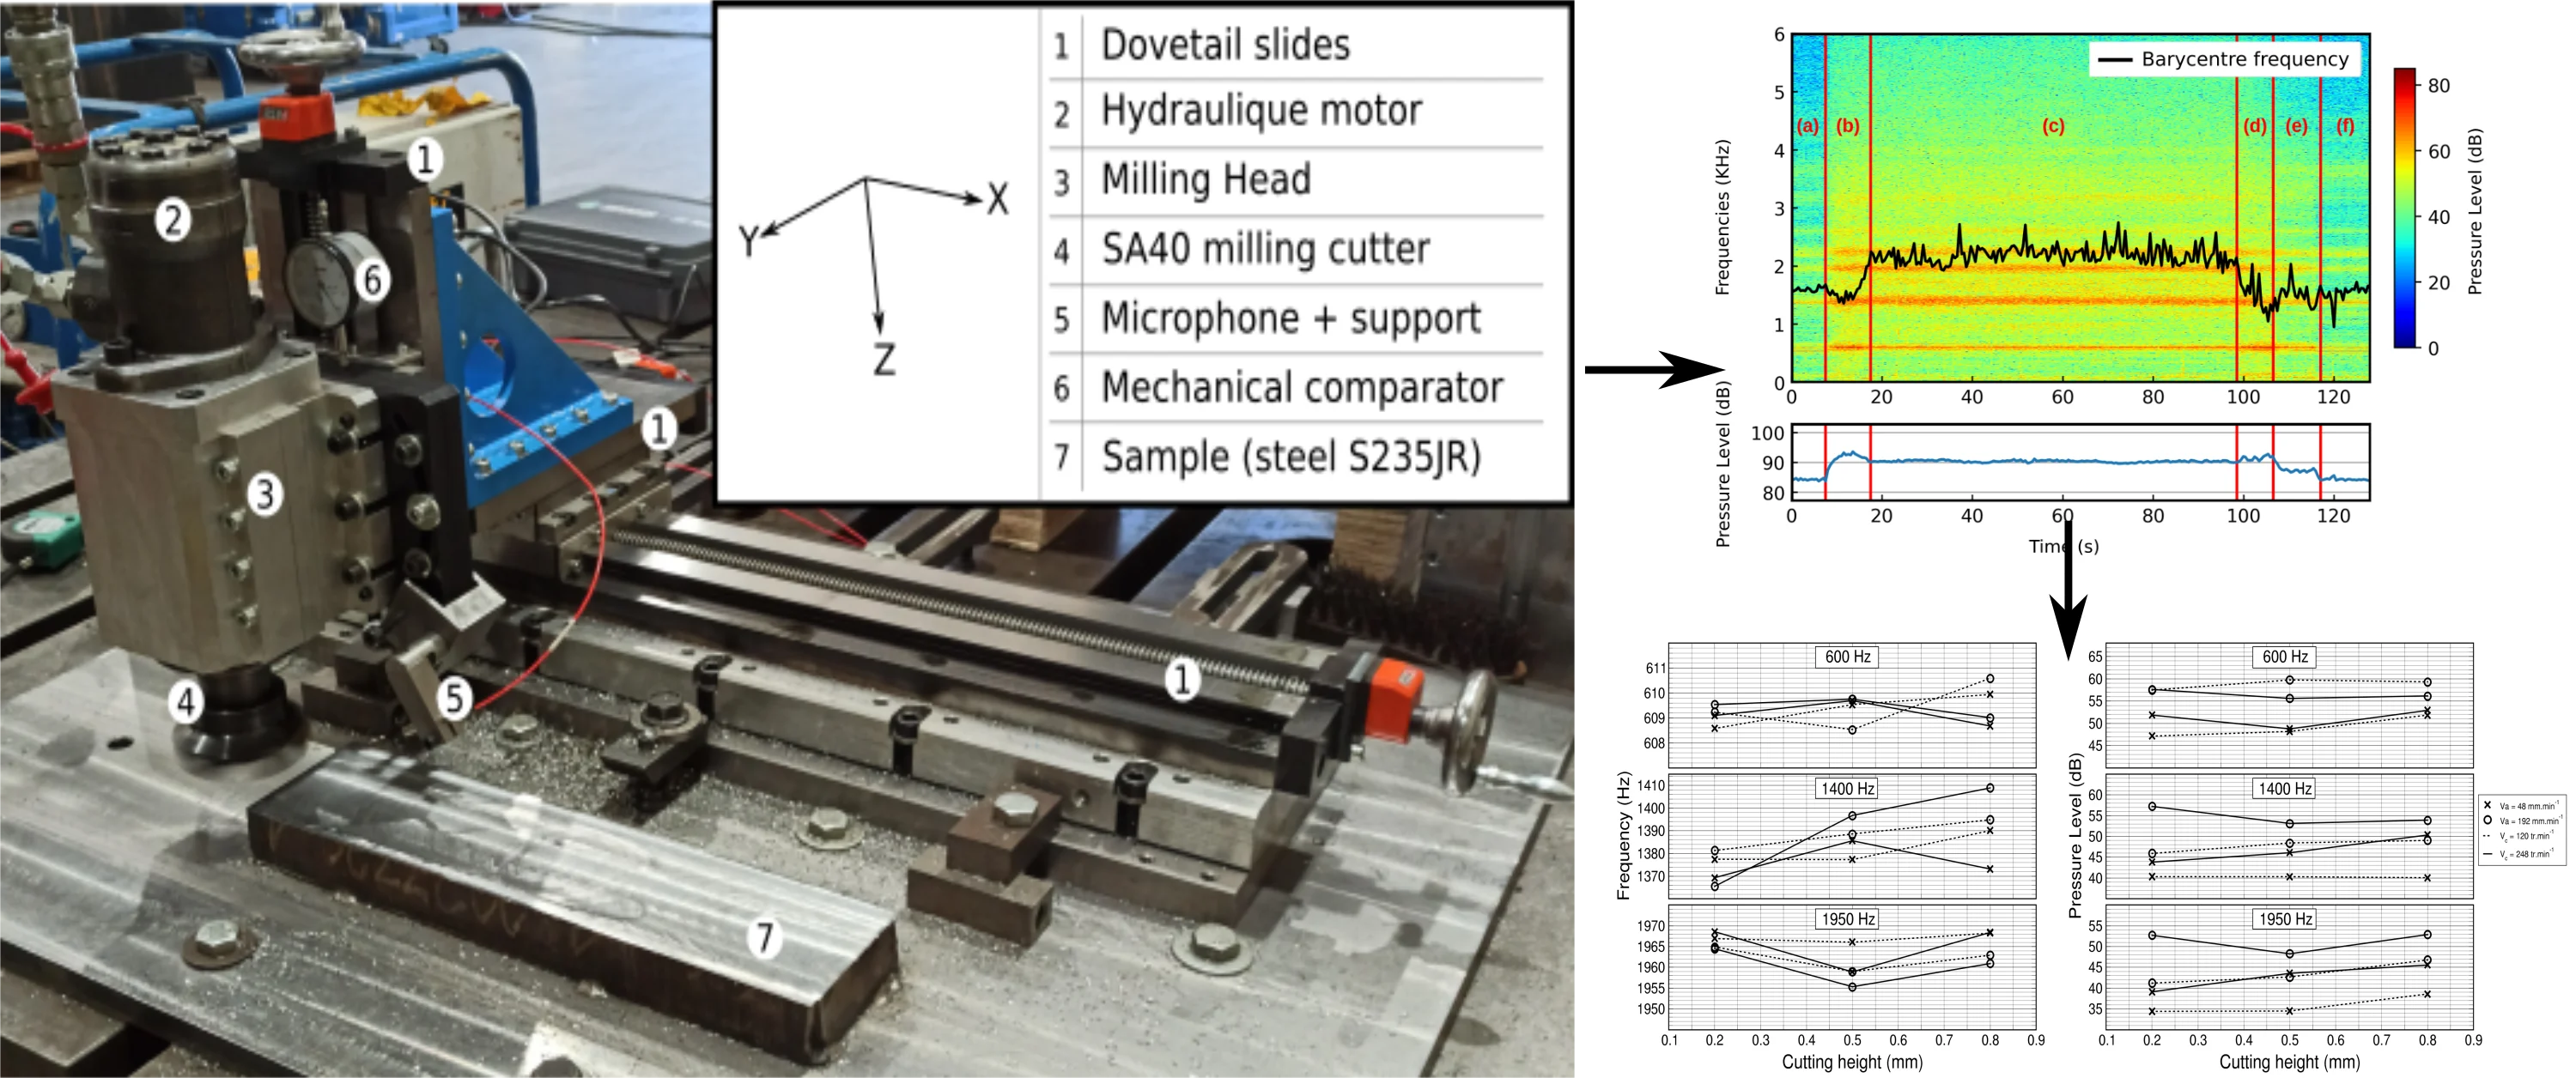 Acoustic characterization of an on-site machining operation